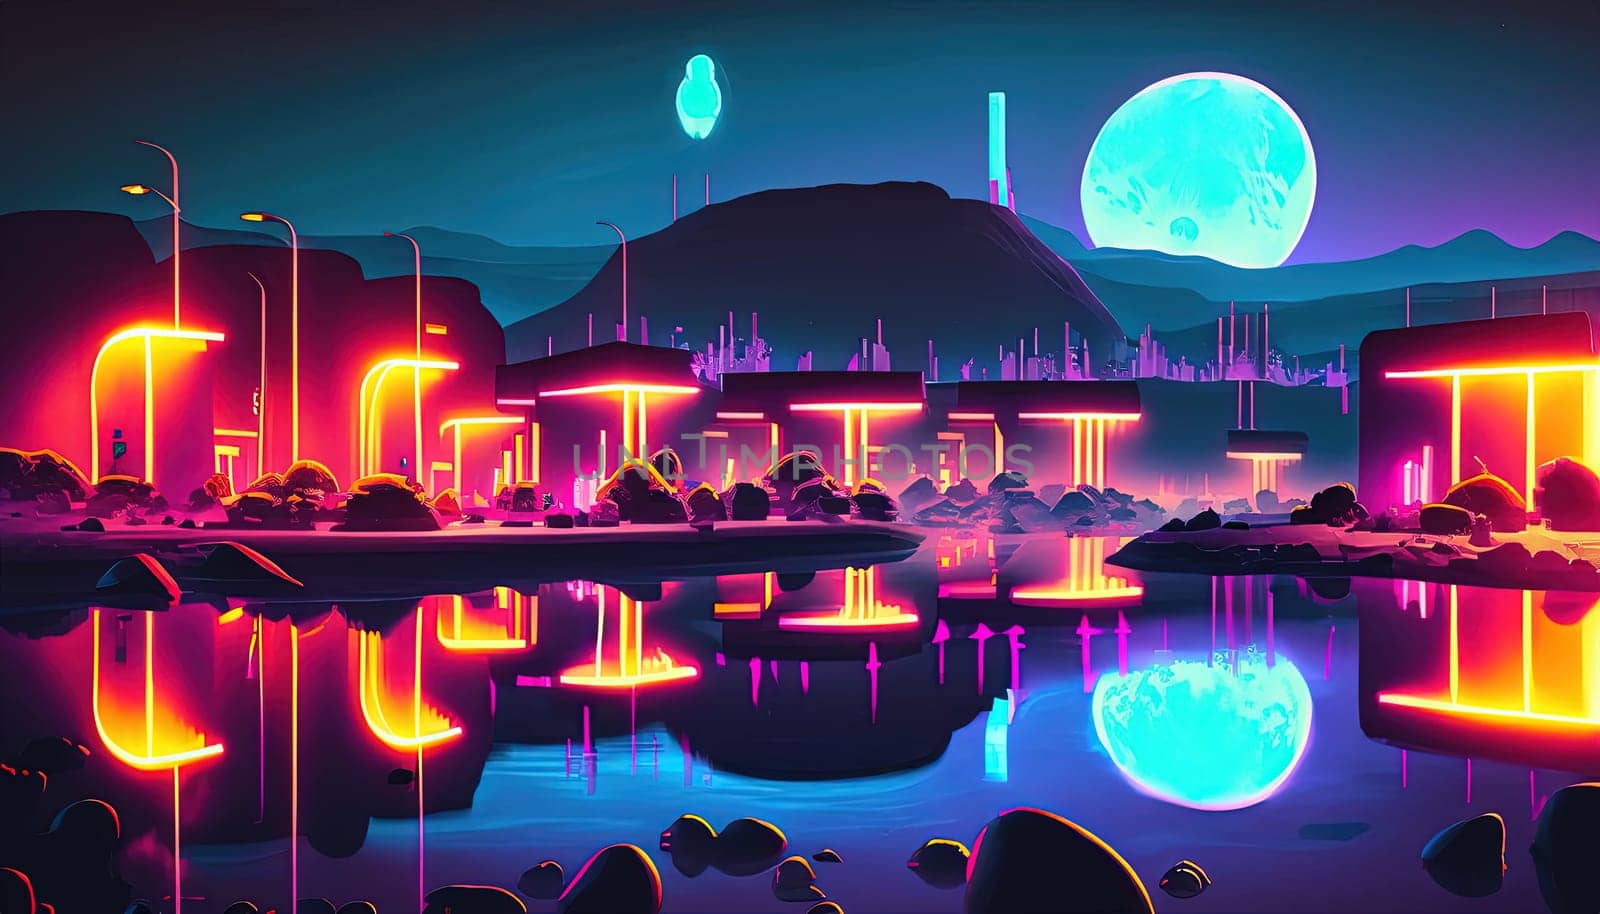 Futuristic city at night with reflection in water. Vector illustration. by Waseem-Creations